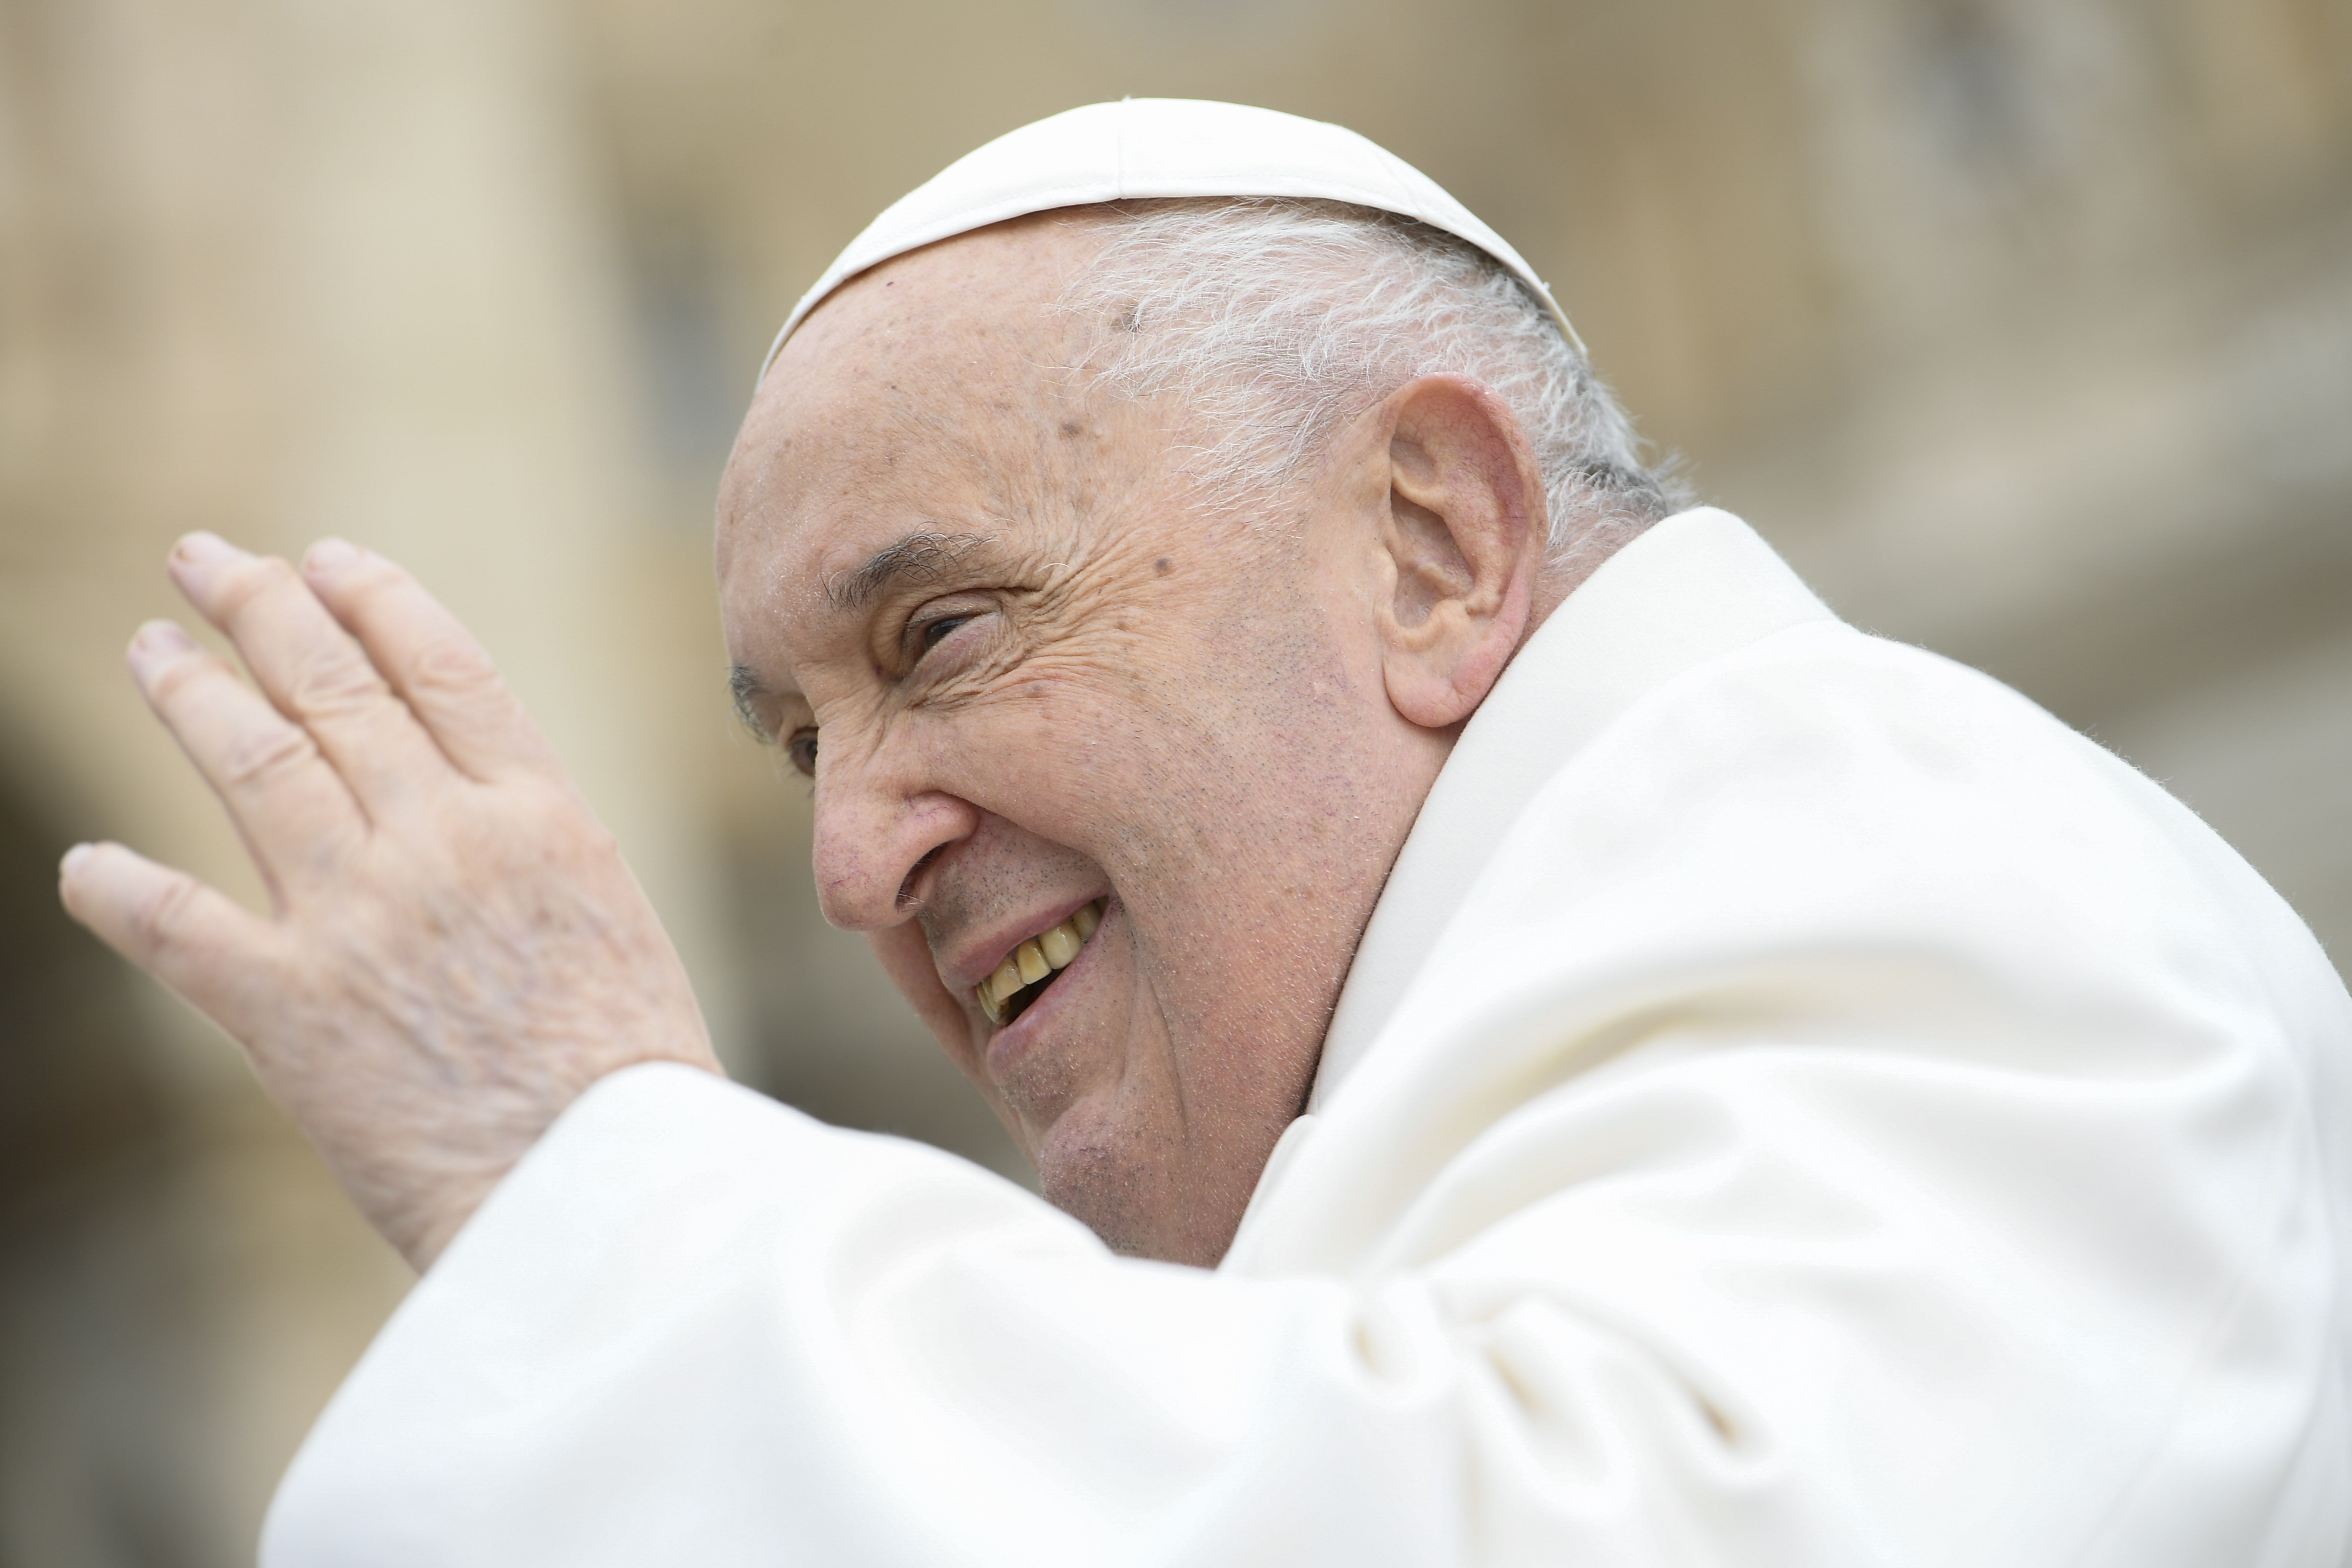 Pope Francis on Gaza conflict: ‘Without justice, there is no peace’